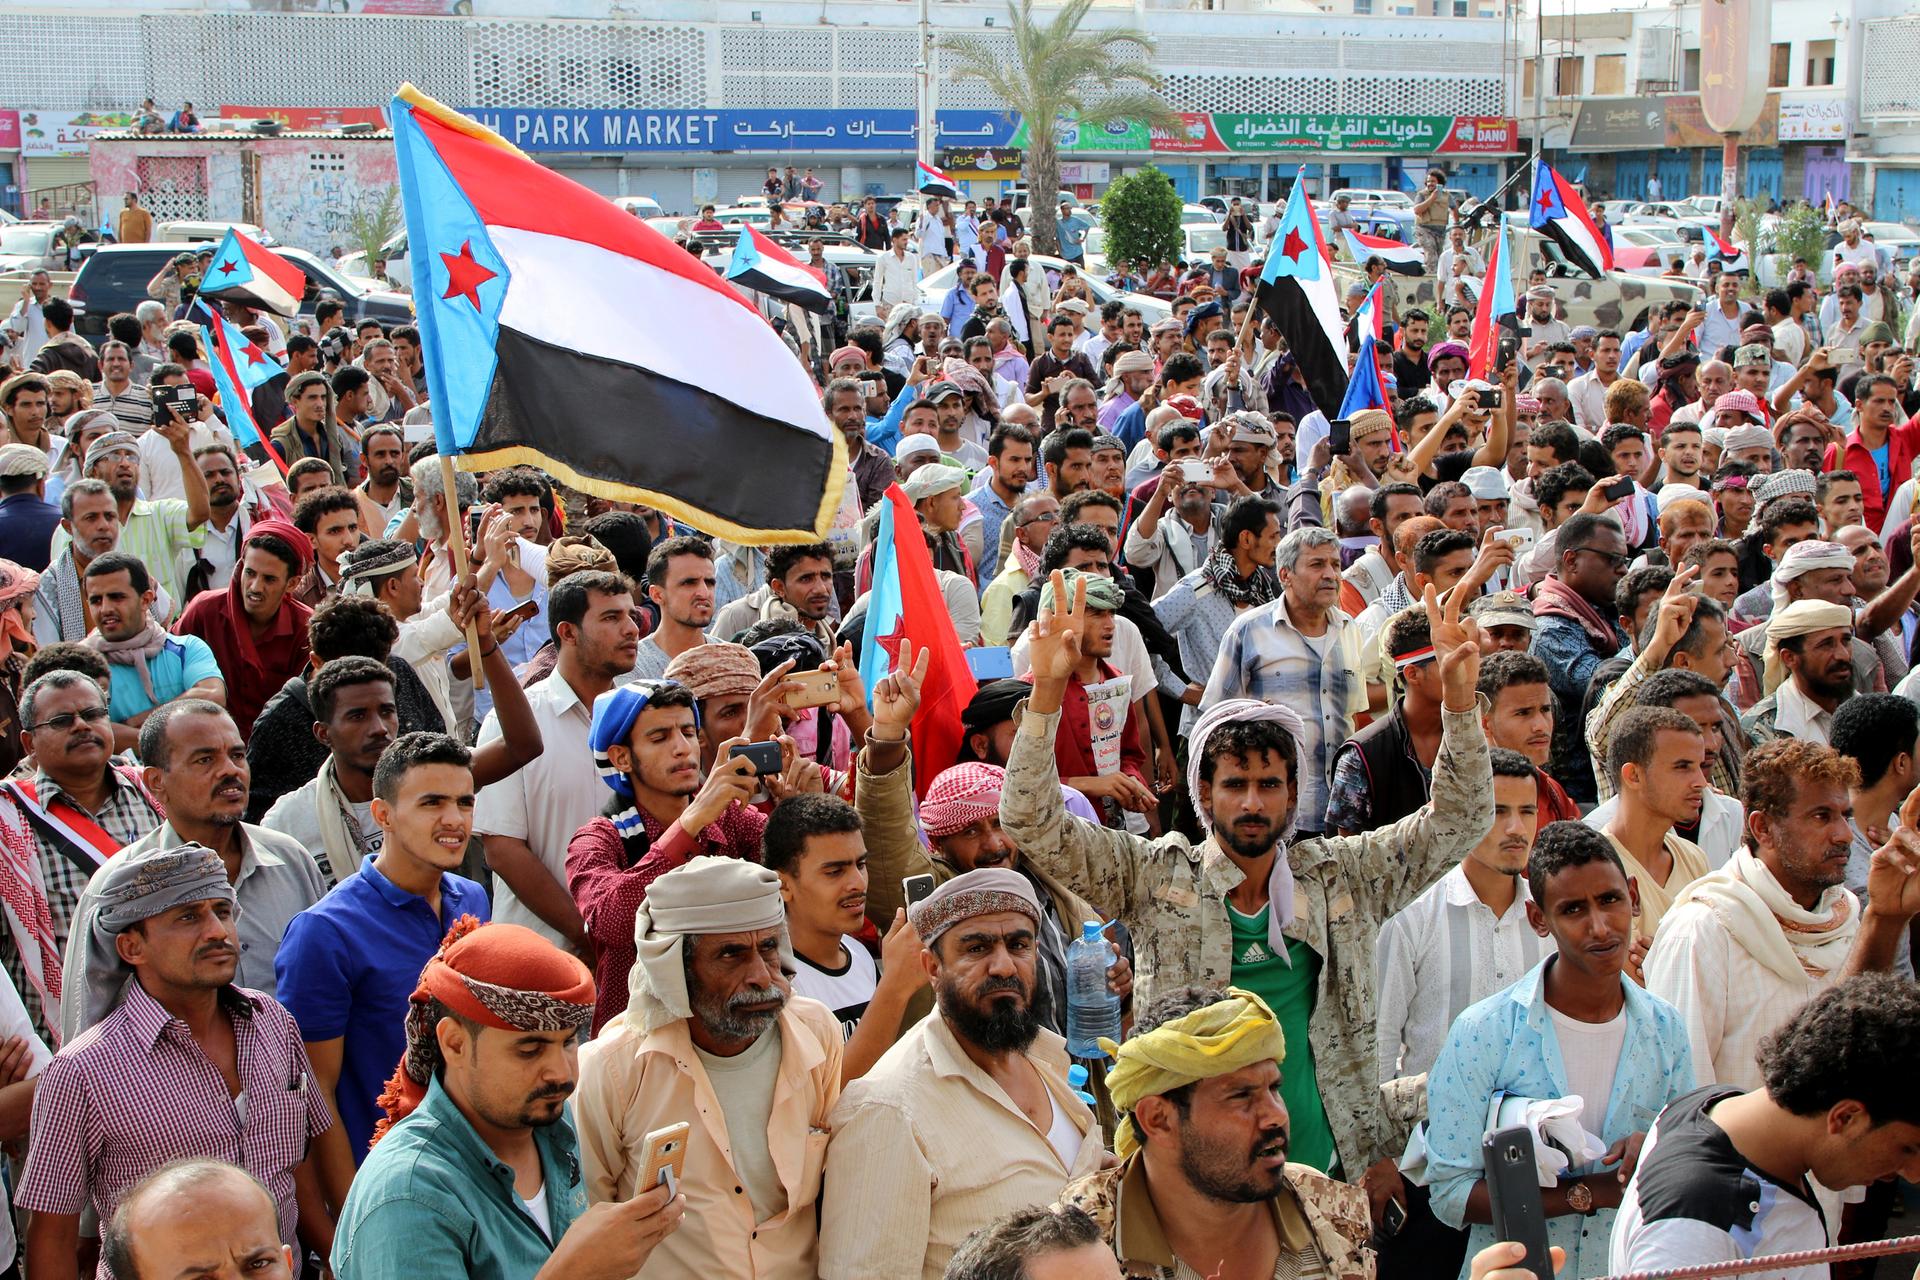 Supporters of southern Yemeni separatists take part in an anti-government protest in Aden, Yemen January 28, 2018